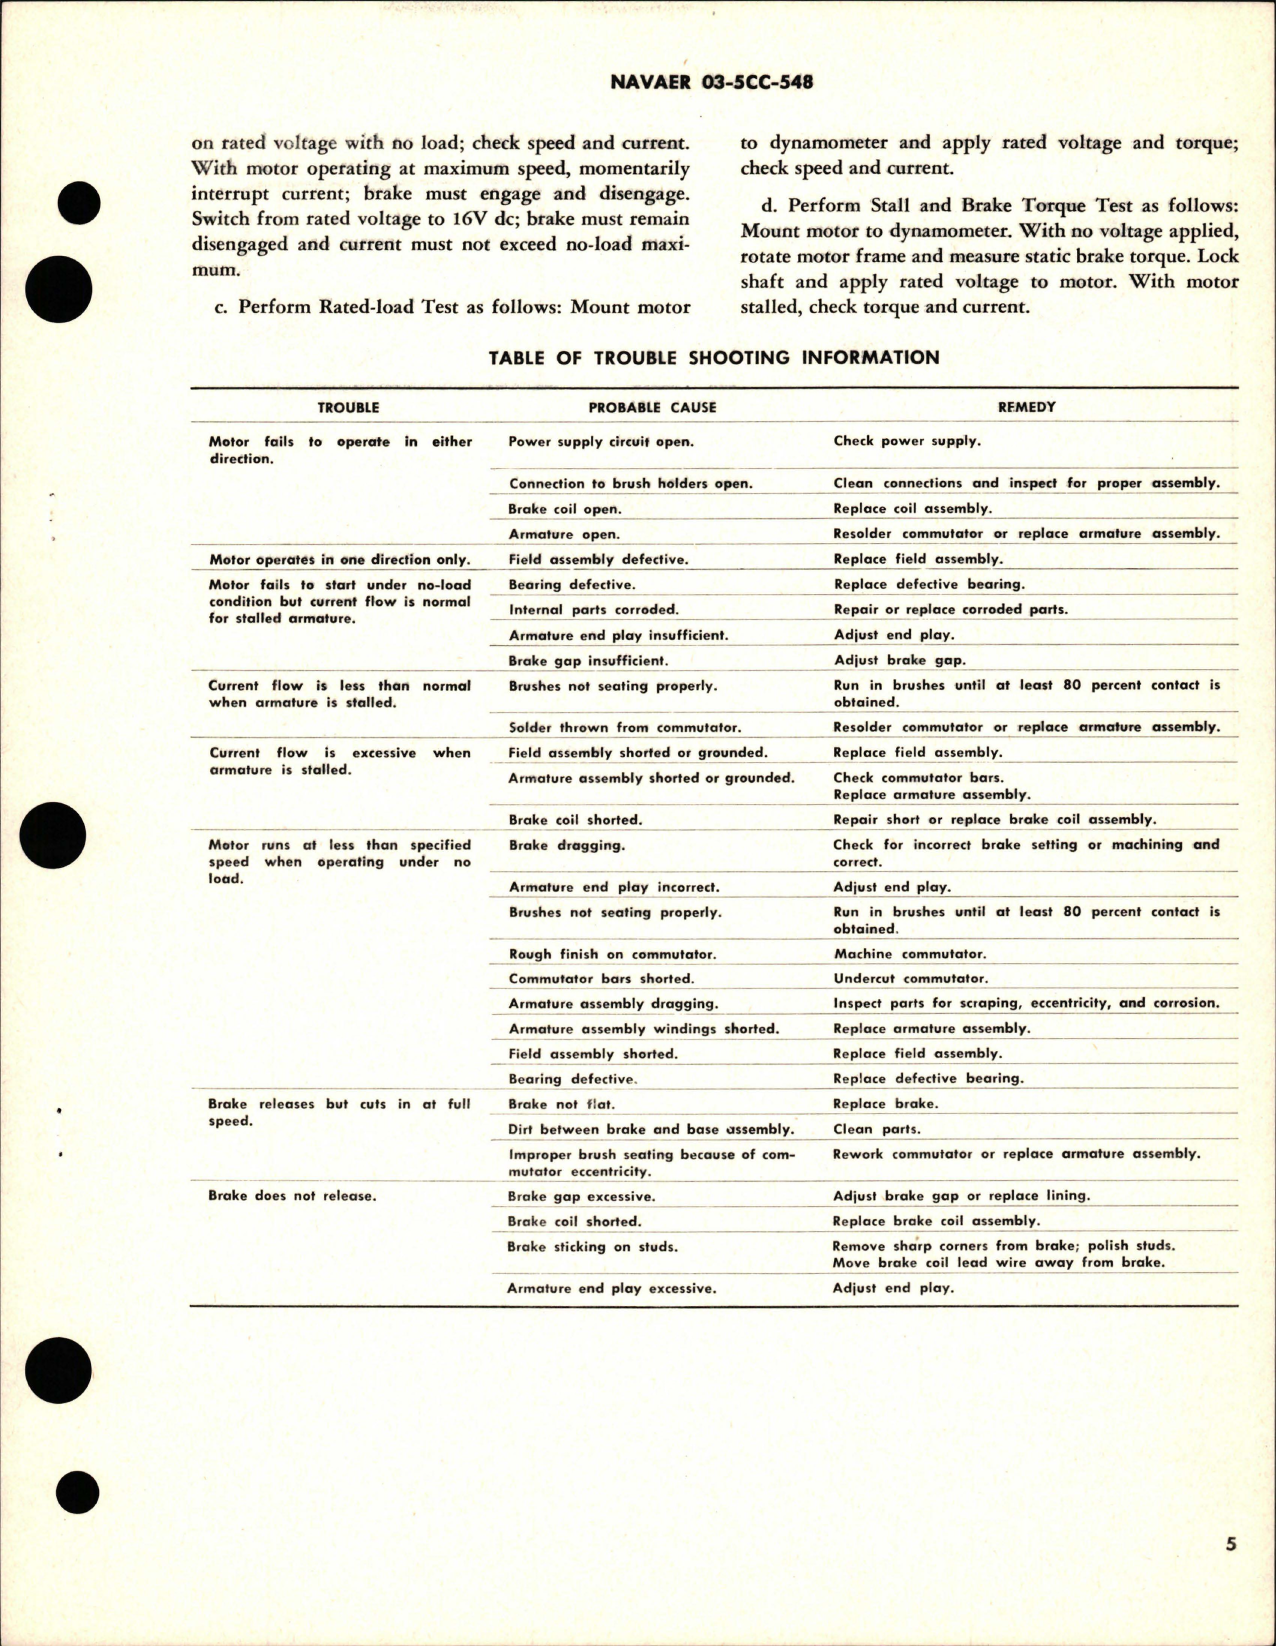 Sample page 5 from AirCorps Library document: Overhaul Instructions with Parts Breakdown for Direct-Current Motor - Part 26968 